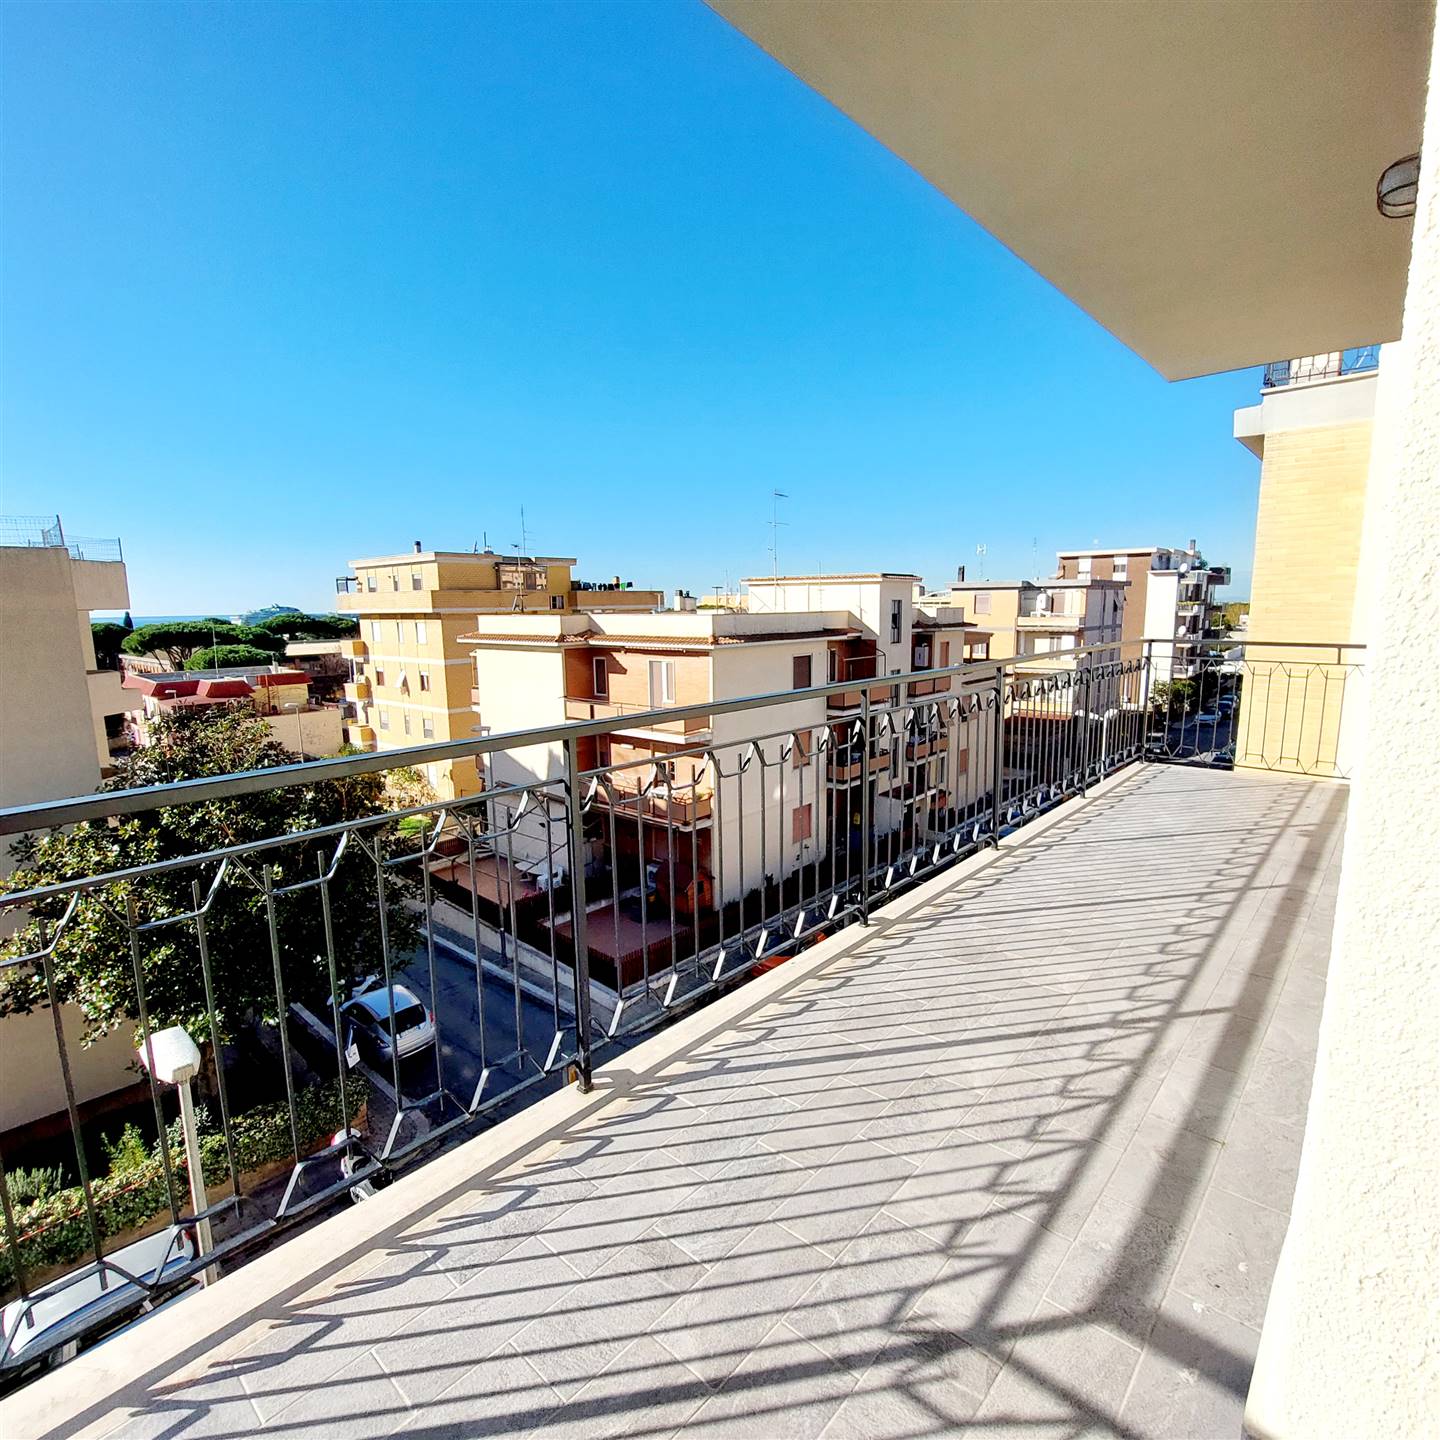 CAPPUCCINI, CIVITAVECCHIA, Apartment for sale of 79 Sq. mt., Habitable, Heating Individual heating system, Energetic class: G, Epi: 175 kwh/m2 year, placed at 3°, composed by: 4.5 Rooms, Separate 